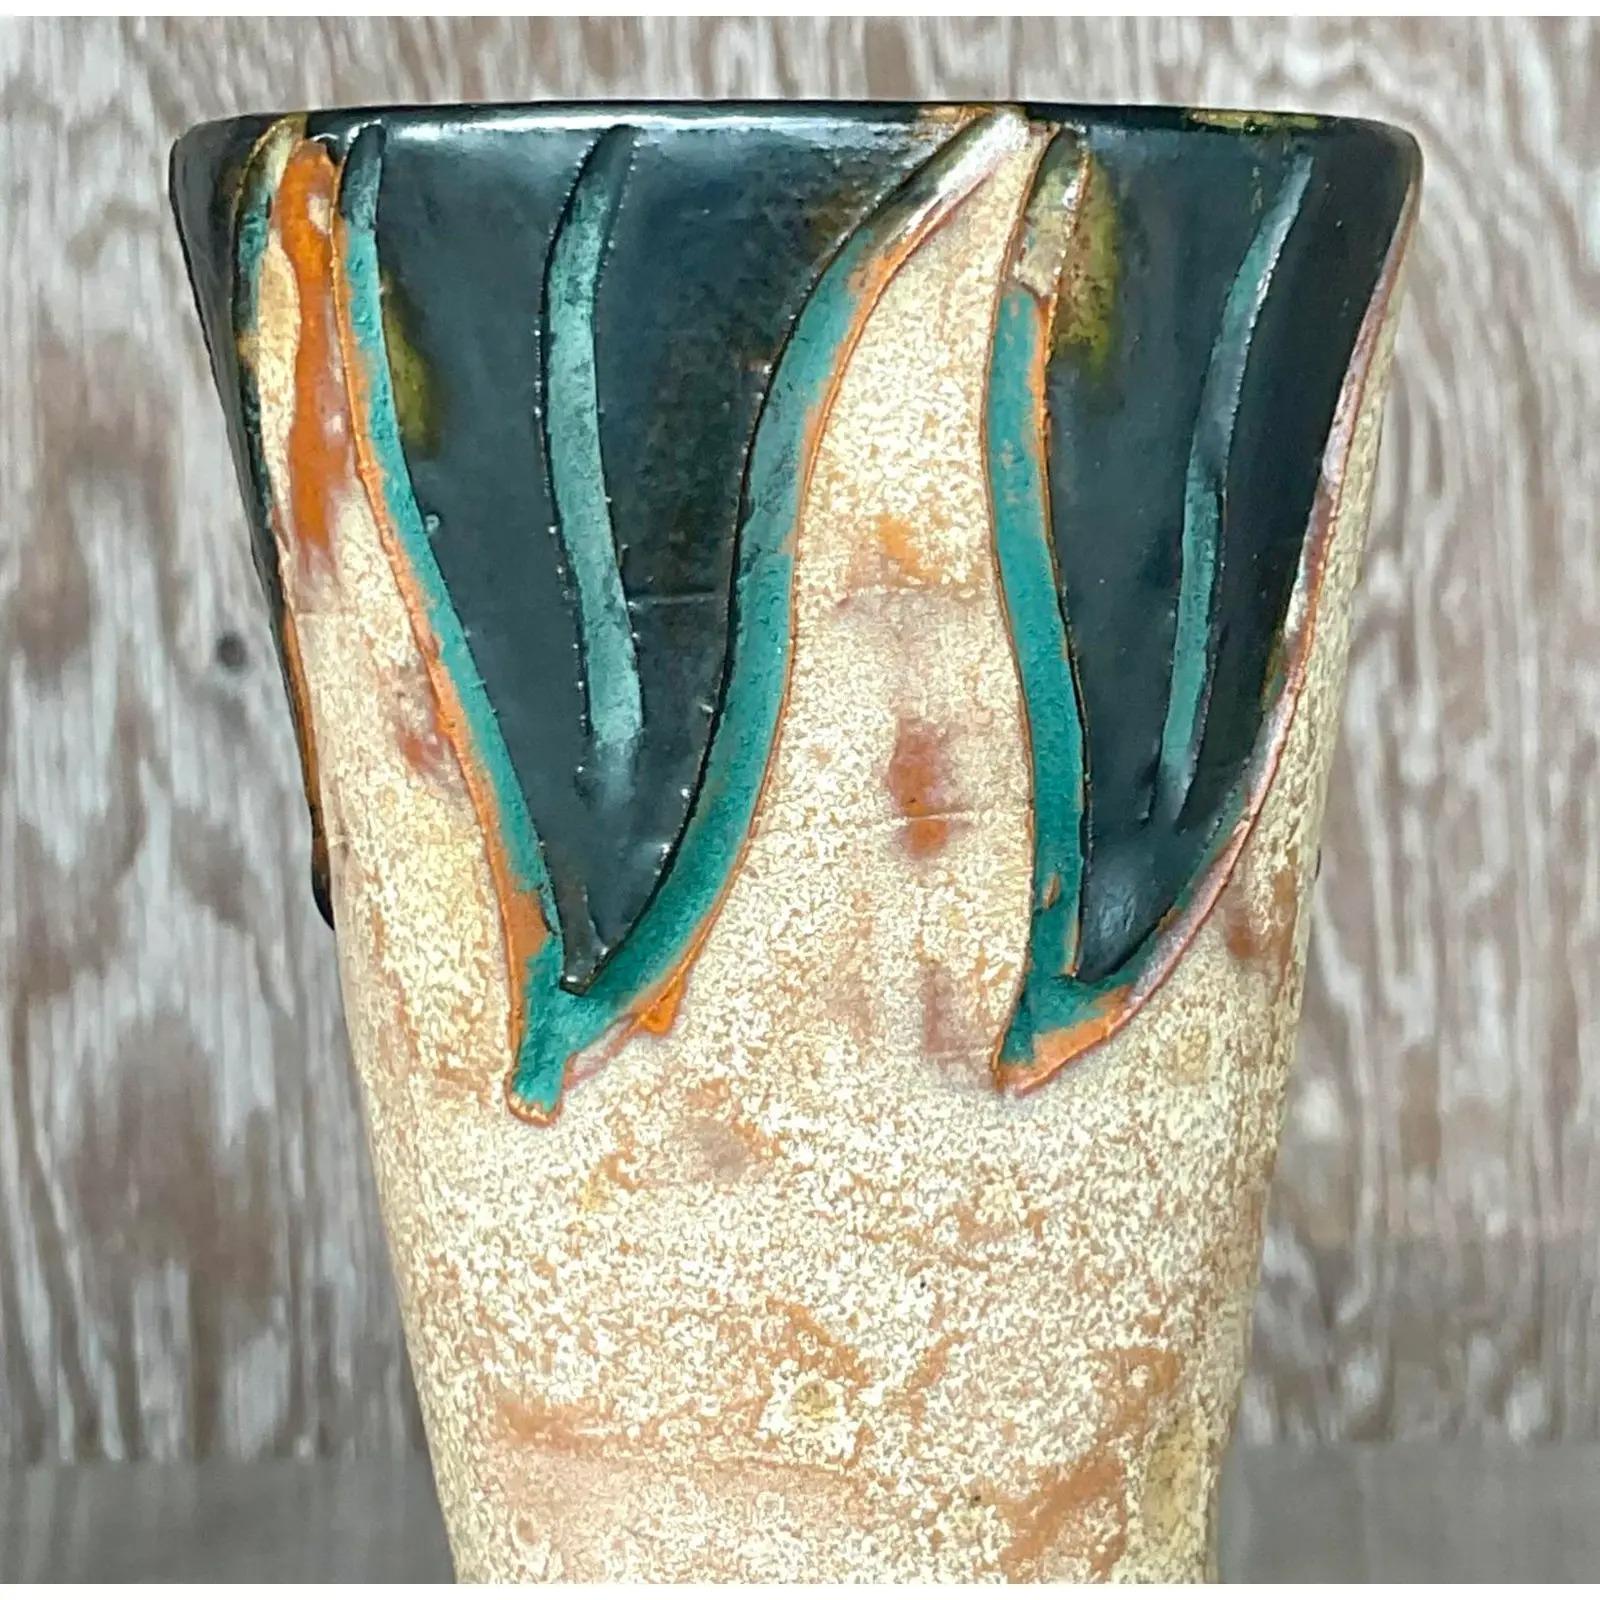 A fantastic vintage Boho vase. A rare Sylvain Subblet piece signed on the bottom. Acquired from a Palm Beach estate.